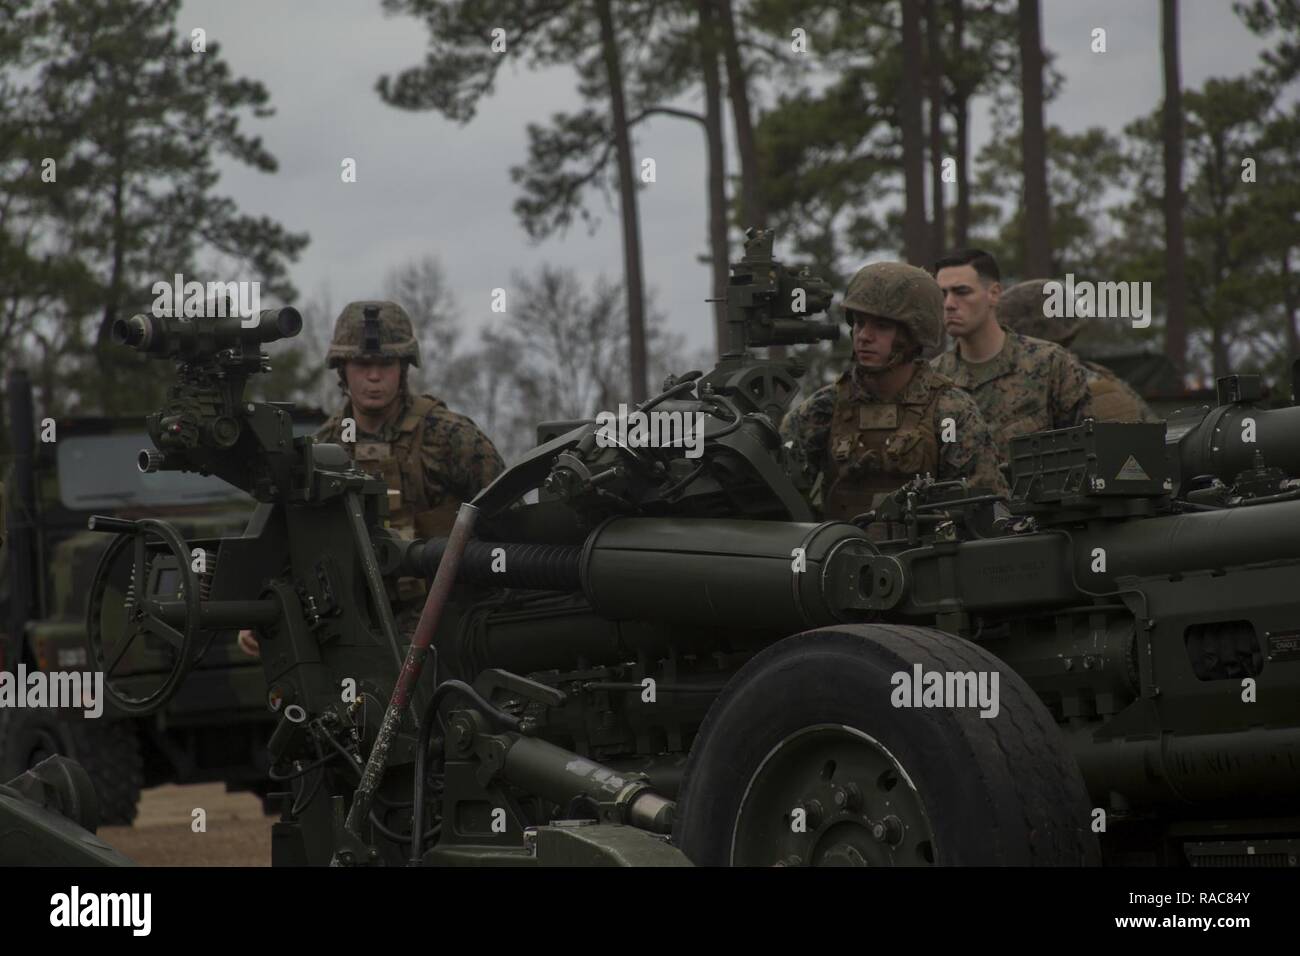 Marines with the Artillery Training School set up an M777A2 towed 155mm howitzer at Camp Lejeune, N.C., Jan. 18, 2017. The howitzer weighs approximately 9,800 pounds and is capable of firing 155mm rounds, which can destroy large enemy targets or illuminate the battlefield to provide support for infantry units. Stock Photo